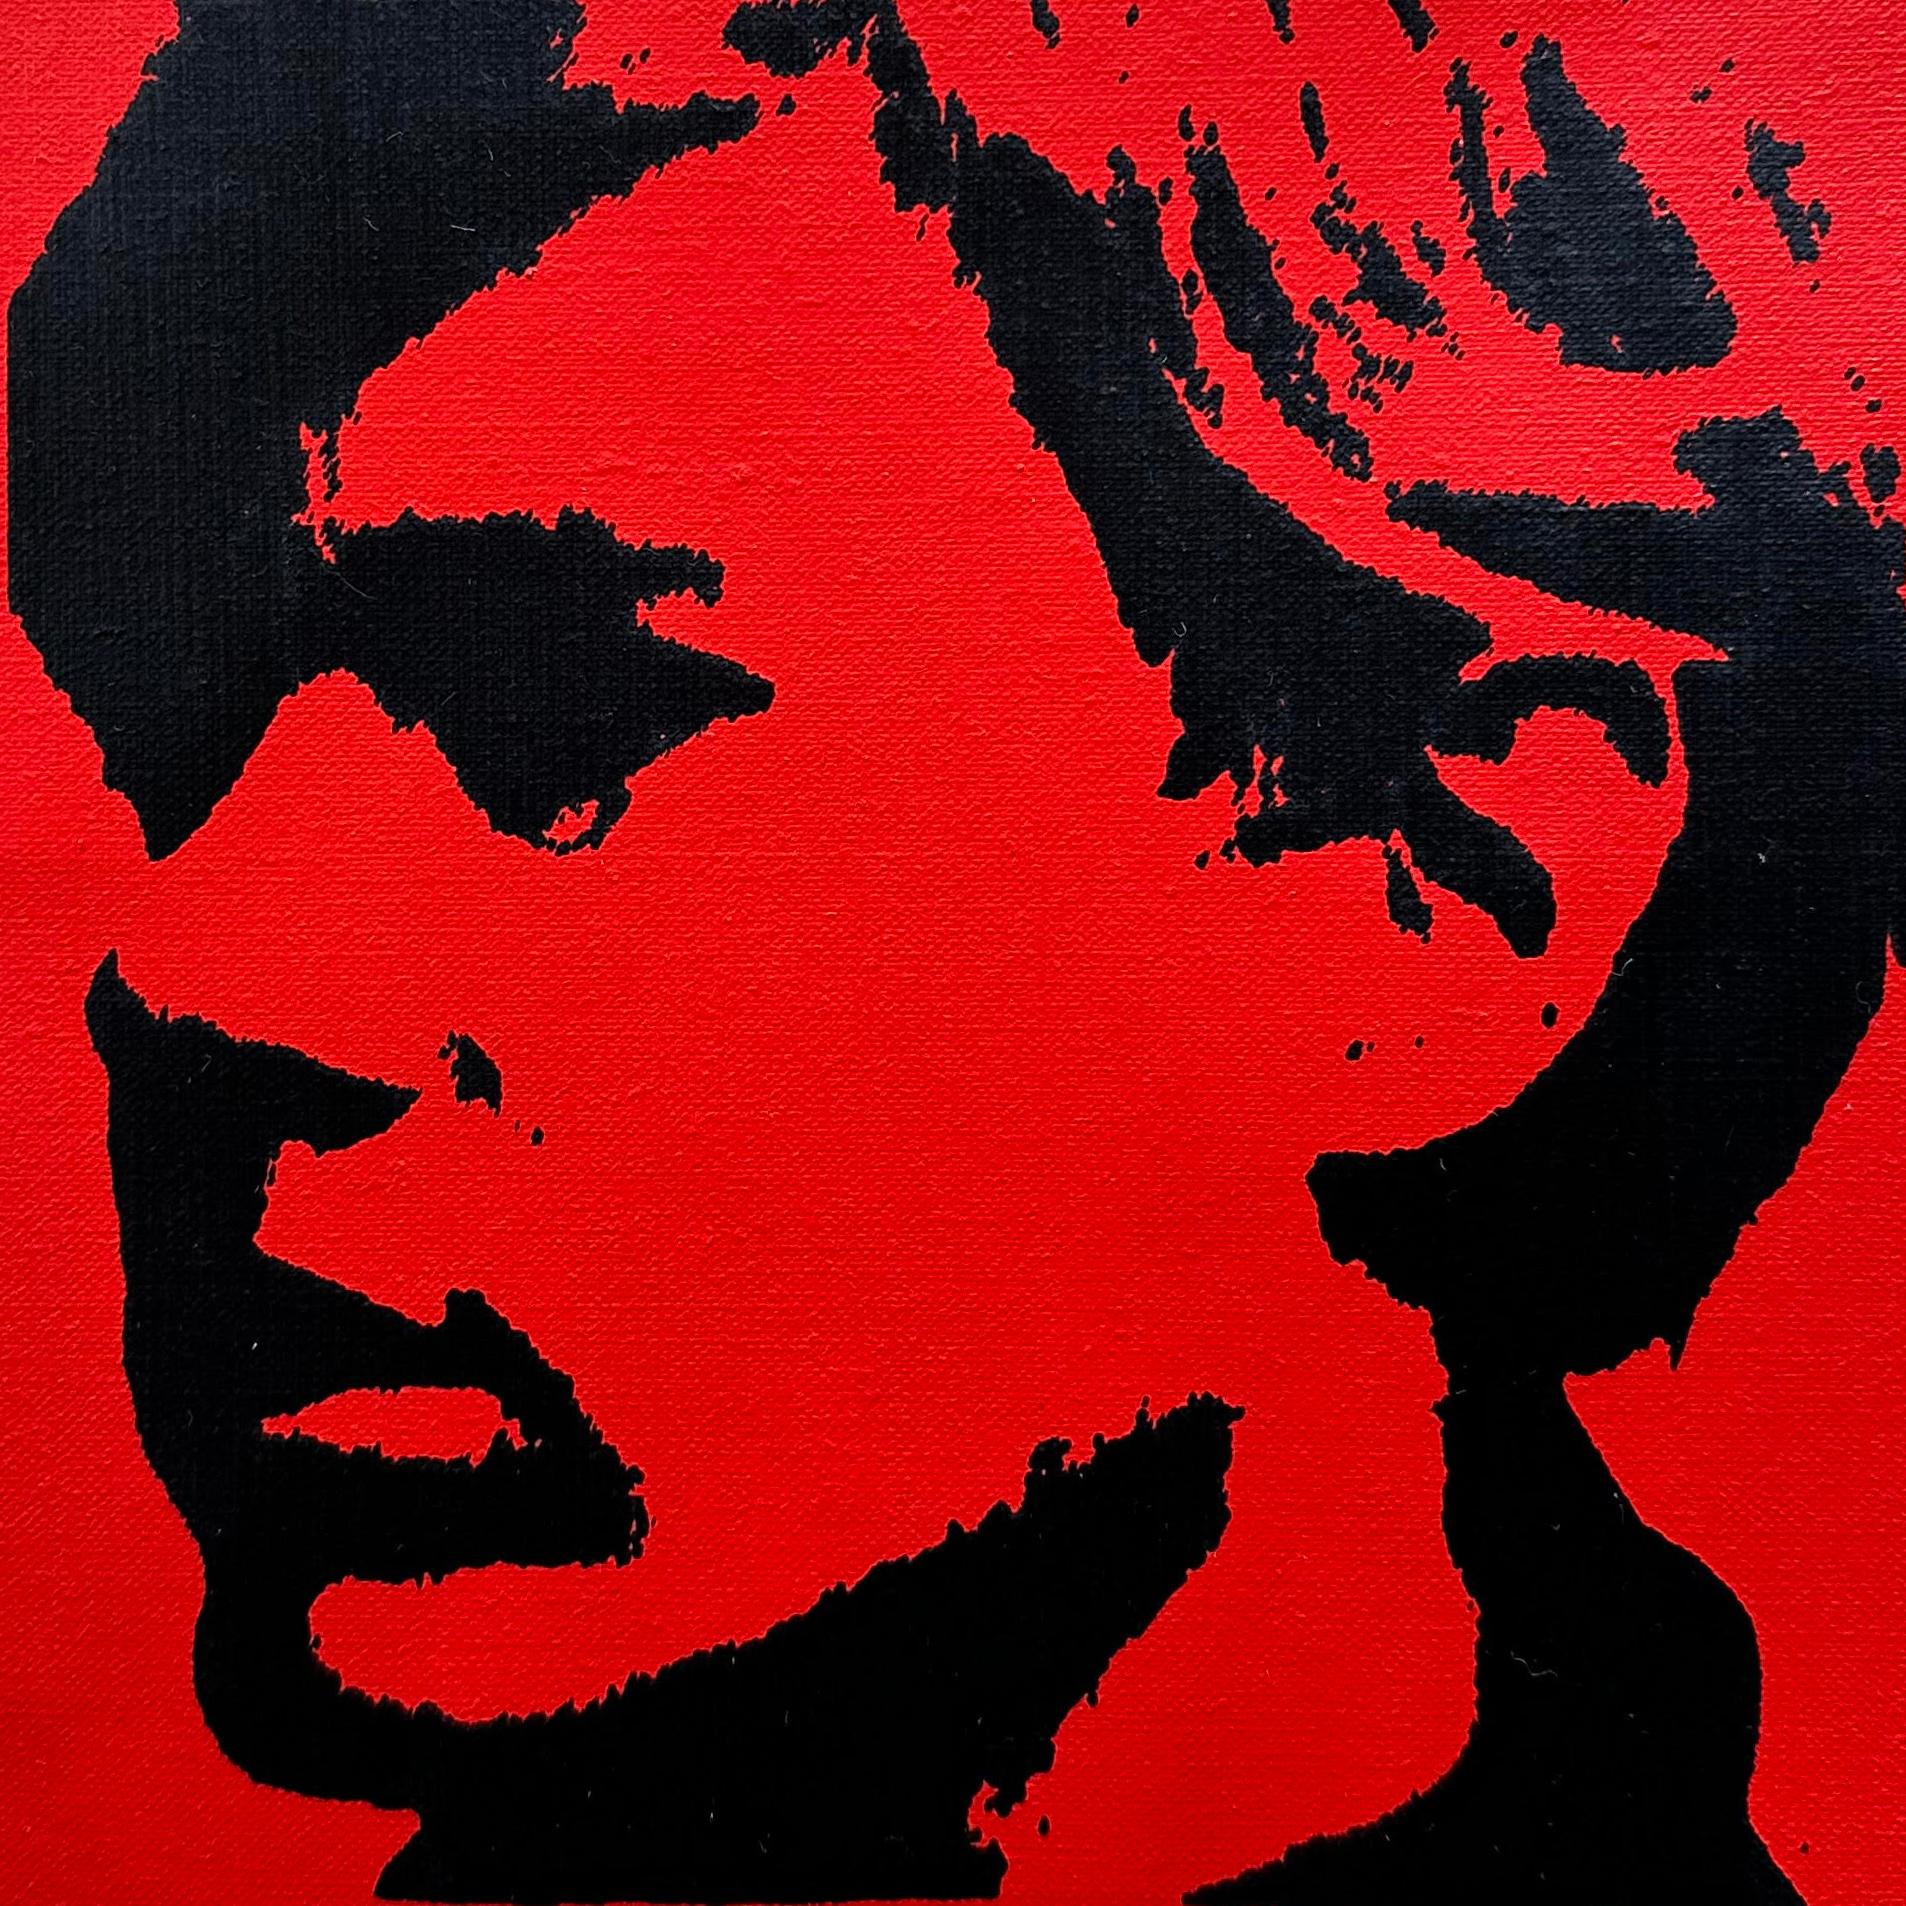 Denied Warhol self portrait painting on linen by Charles Lutz
Silkscreen and acrylic on linen with artist's Denied stamp of the Andy Warhol Art Authentication Board. 
10 x 10" inches 
2008

Lutz's 2007 ''Warhol Denied'' series gained him